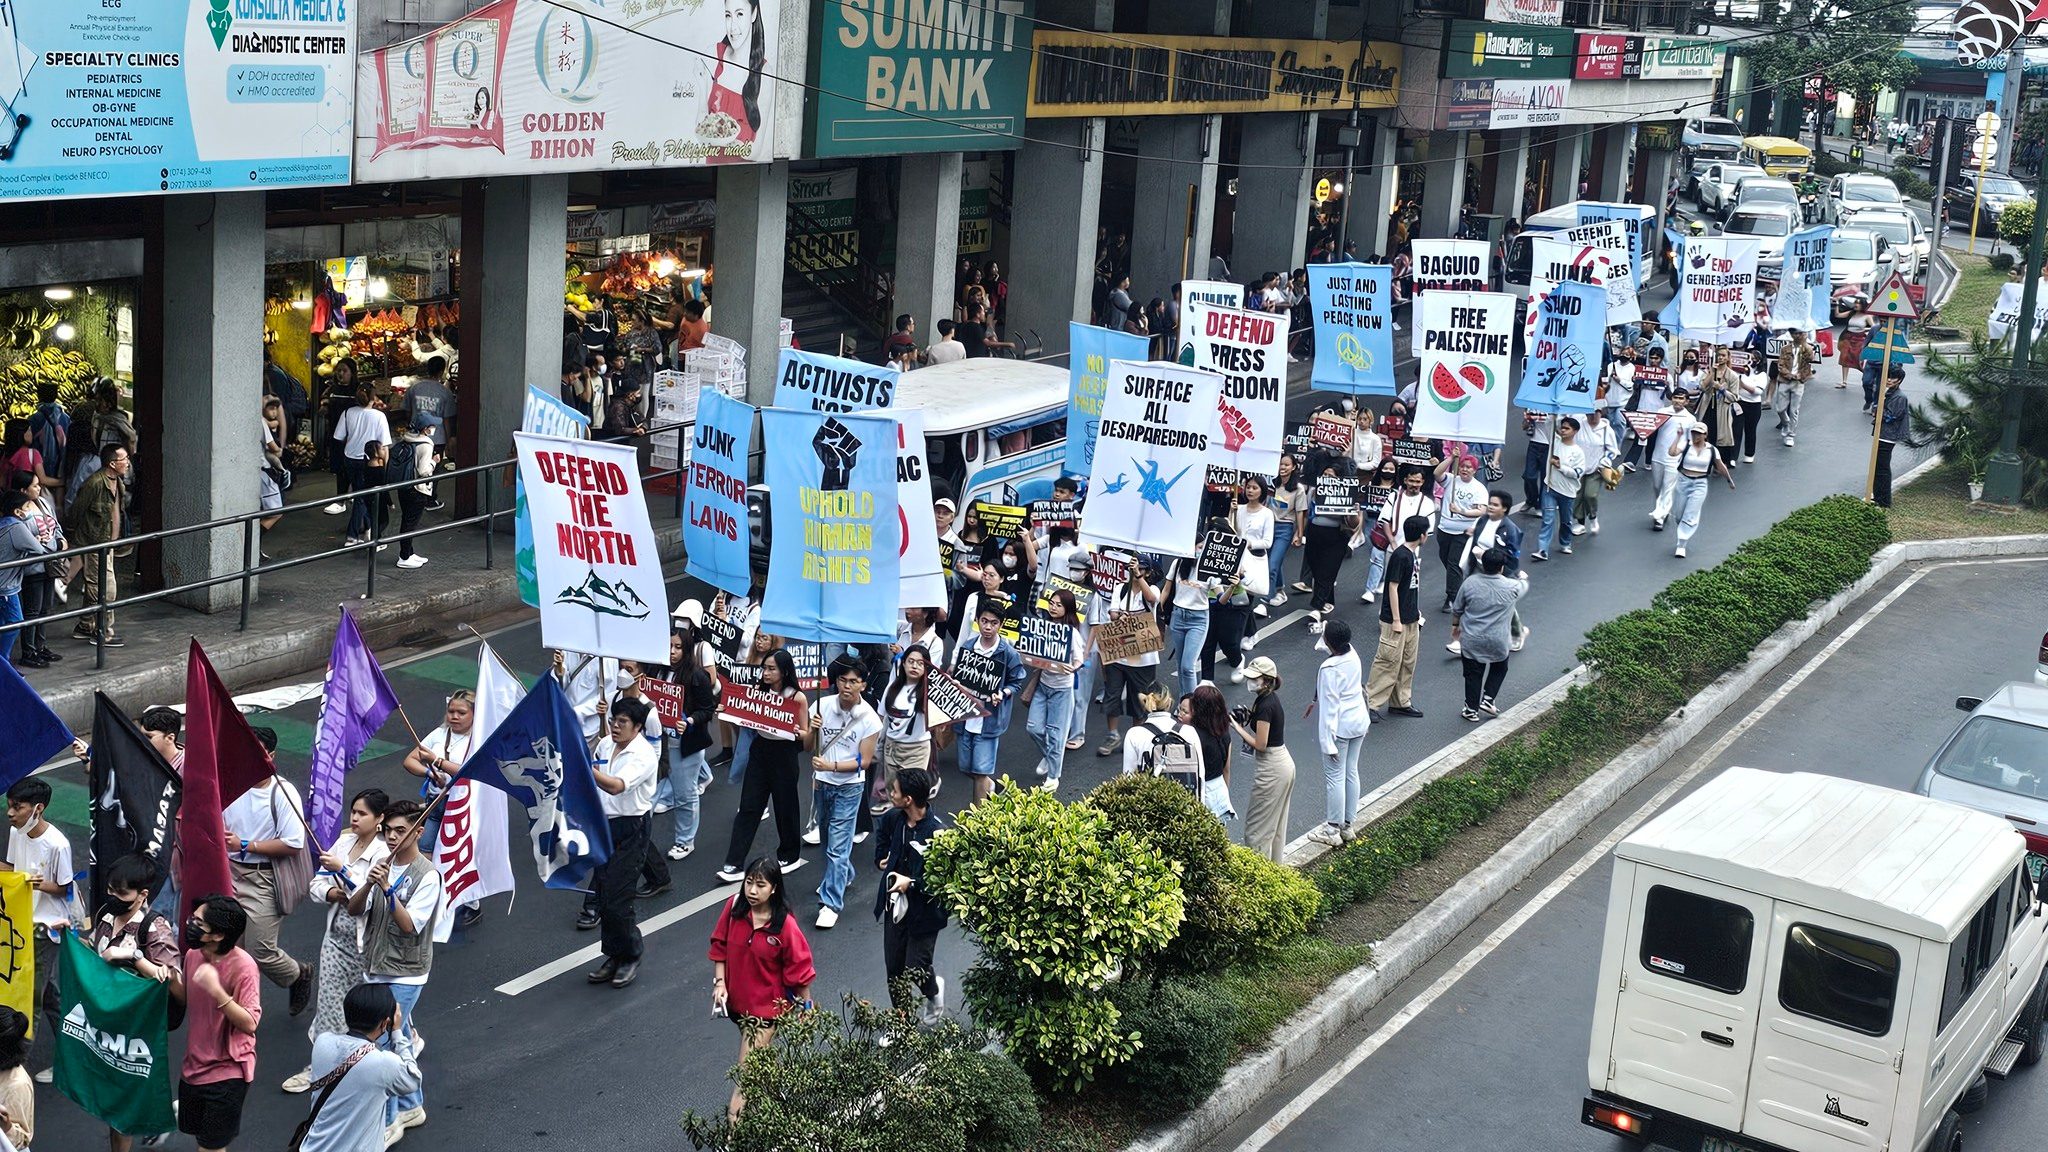 Baguio groups rally to call for change, respect for human rights